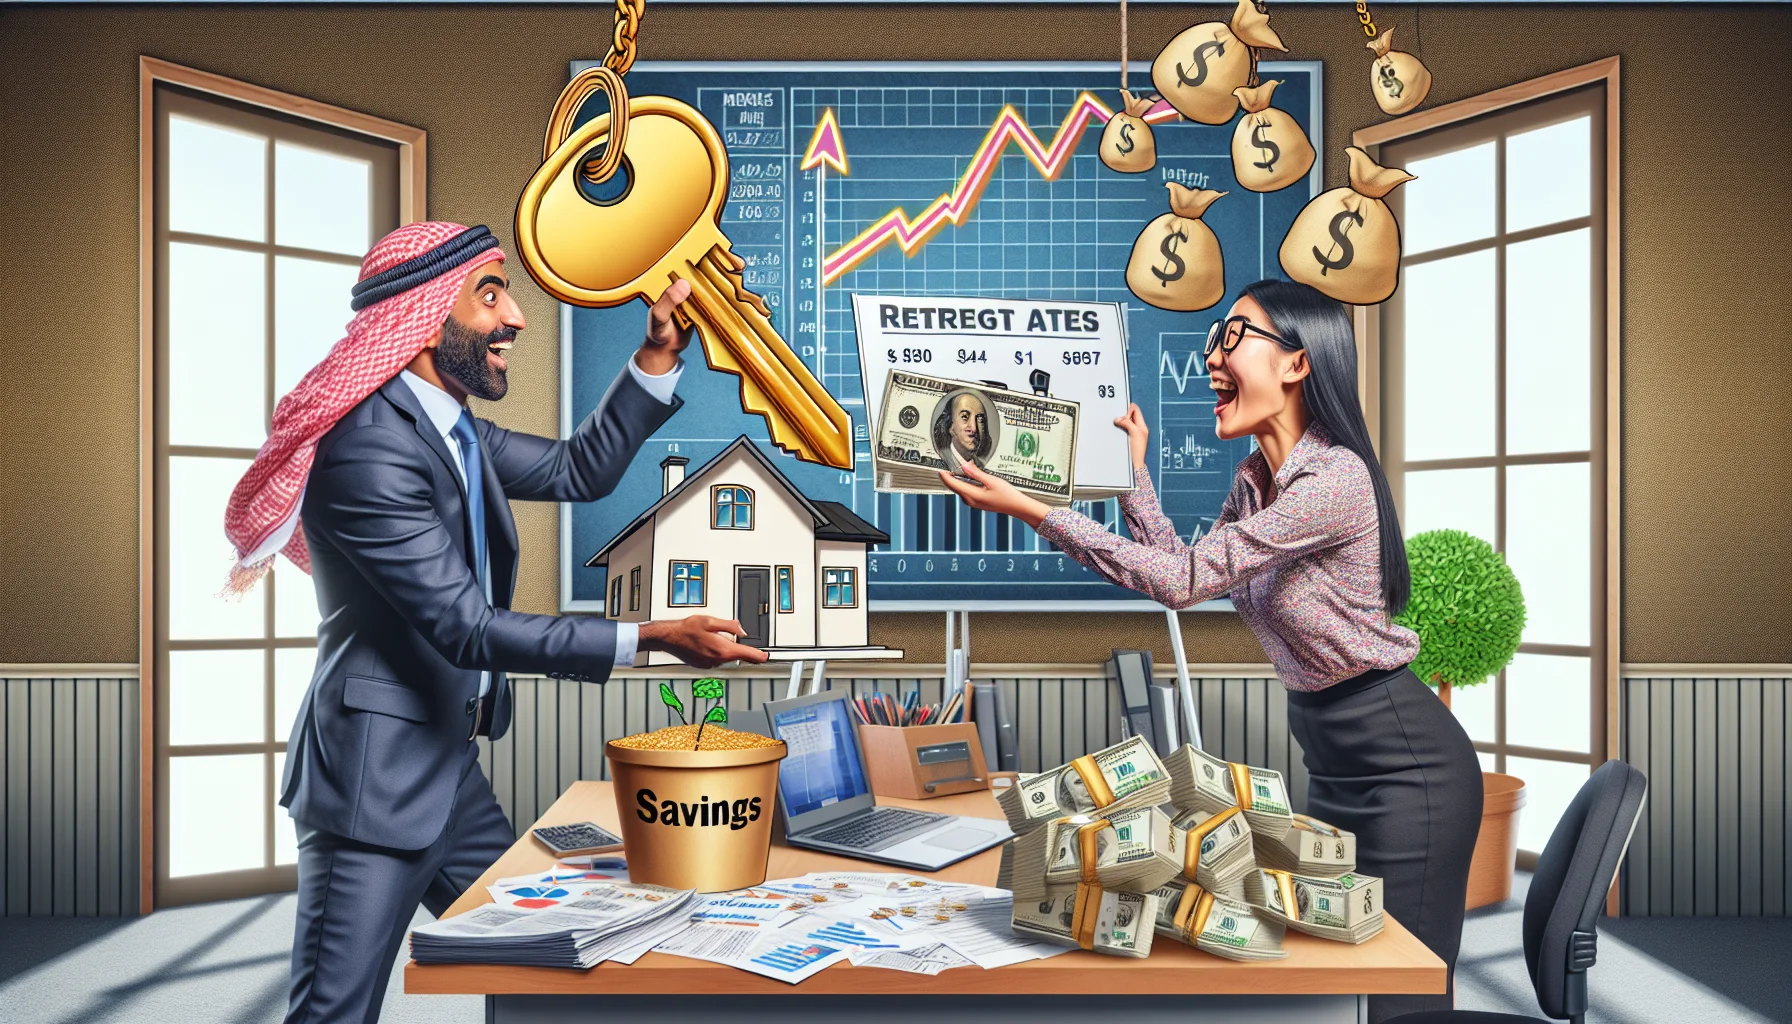 A humorous yet visually realistic interpretation of the perfect real estate mortgage scenario. Imagine a scene set in a bustling yet well-organised finance office. A male Middle-Eastern mortgage broker is handing over giant golden keys to an overjoyed Asian female client, who is holding blueprints of a perfect house. Behind them, on a whiteboard is a chart with drastically decreasing interest rates shaped in a form of a joyful smiley. To add the comic relief, a money tree is growing out of a pot marked as 'Savings' by the side of the office desk.